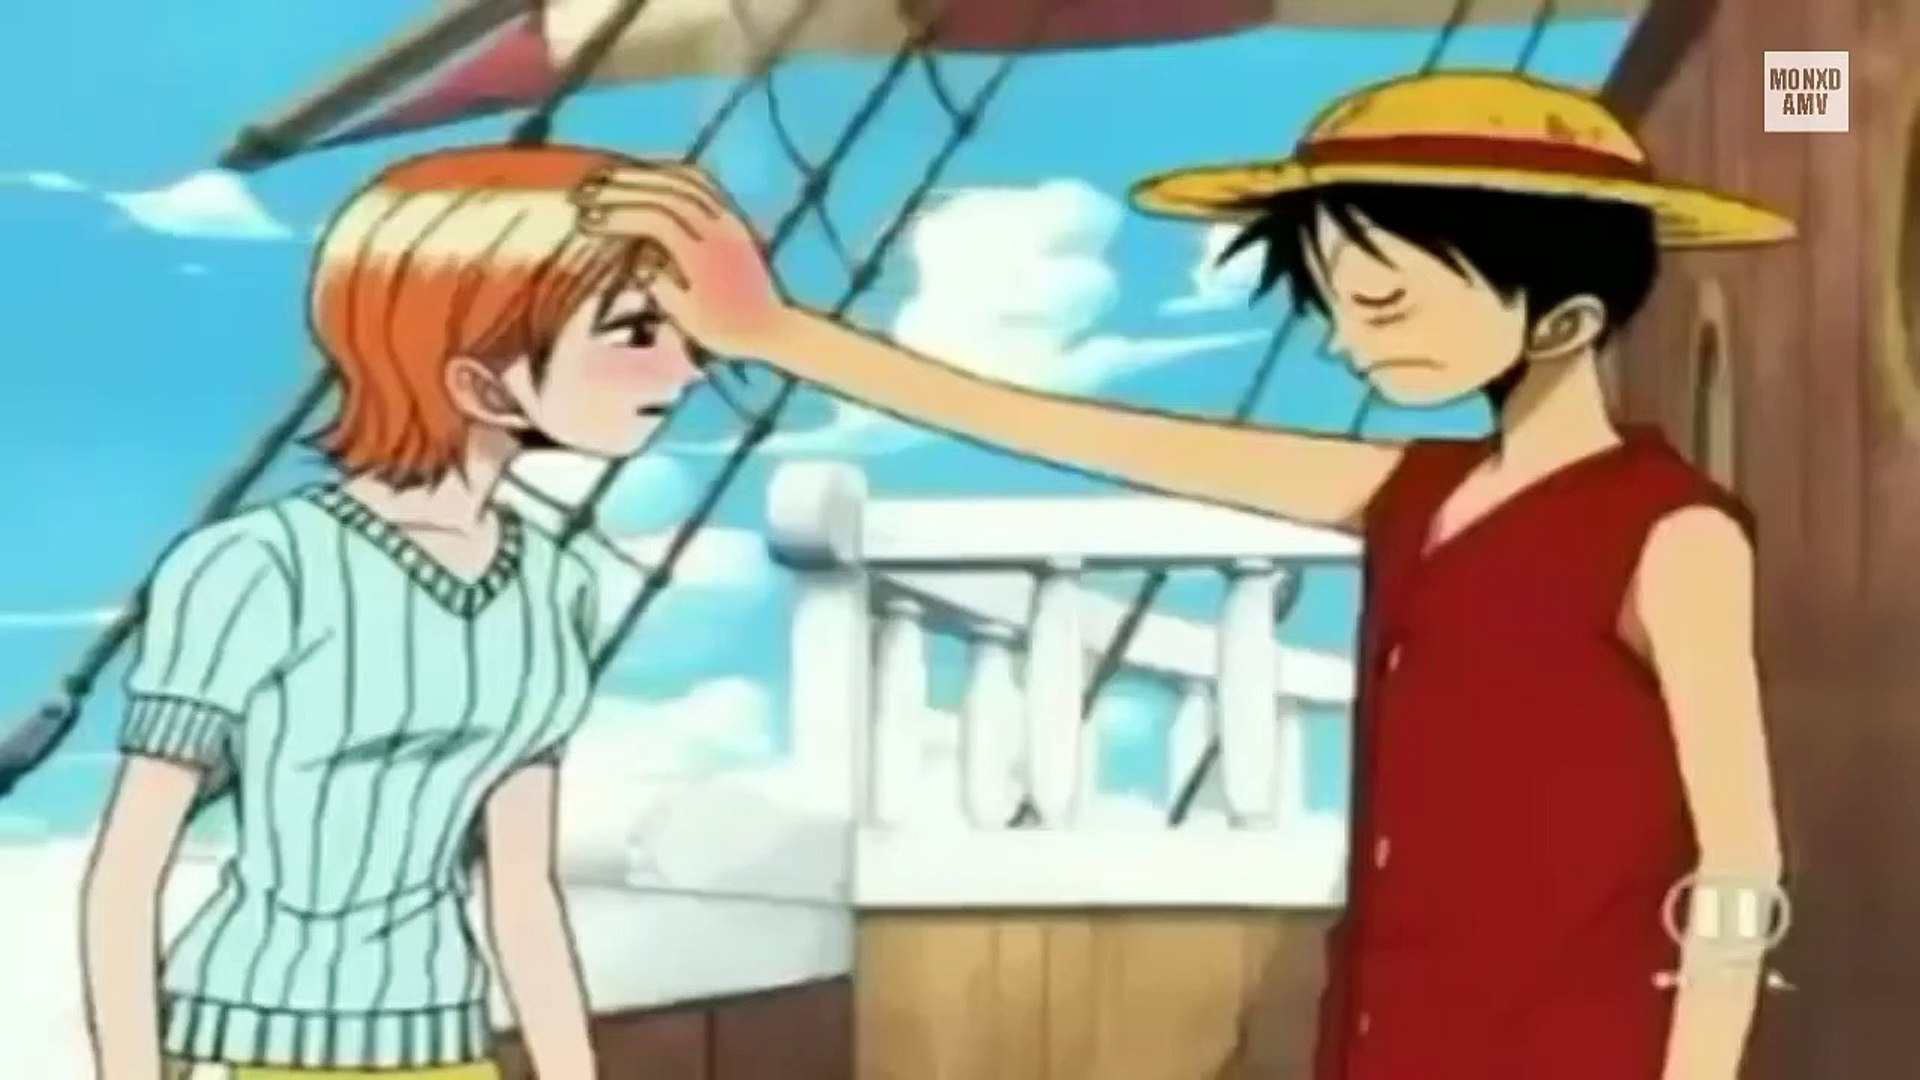 Nami try's to drown Luffy - video Dailymotion